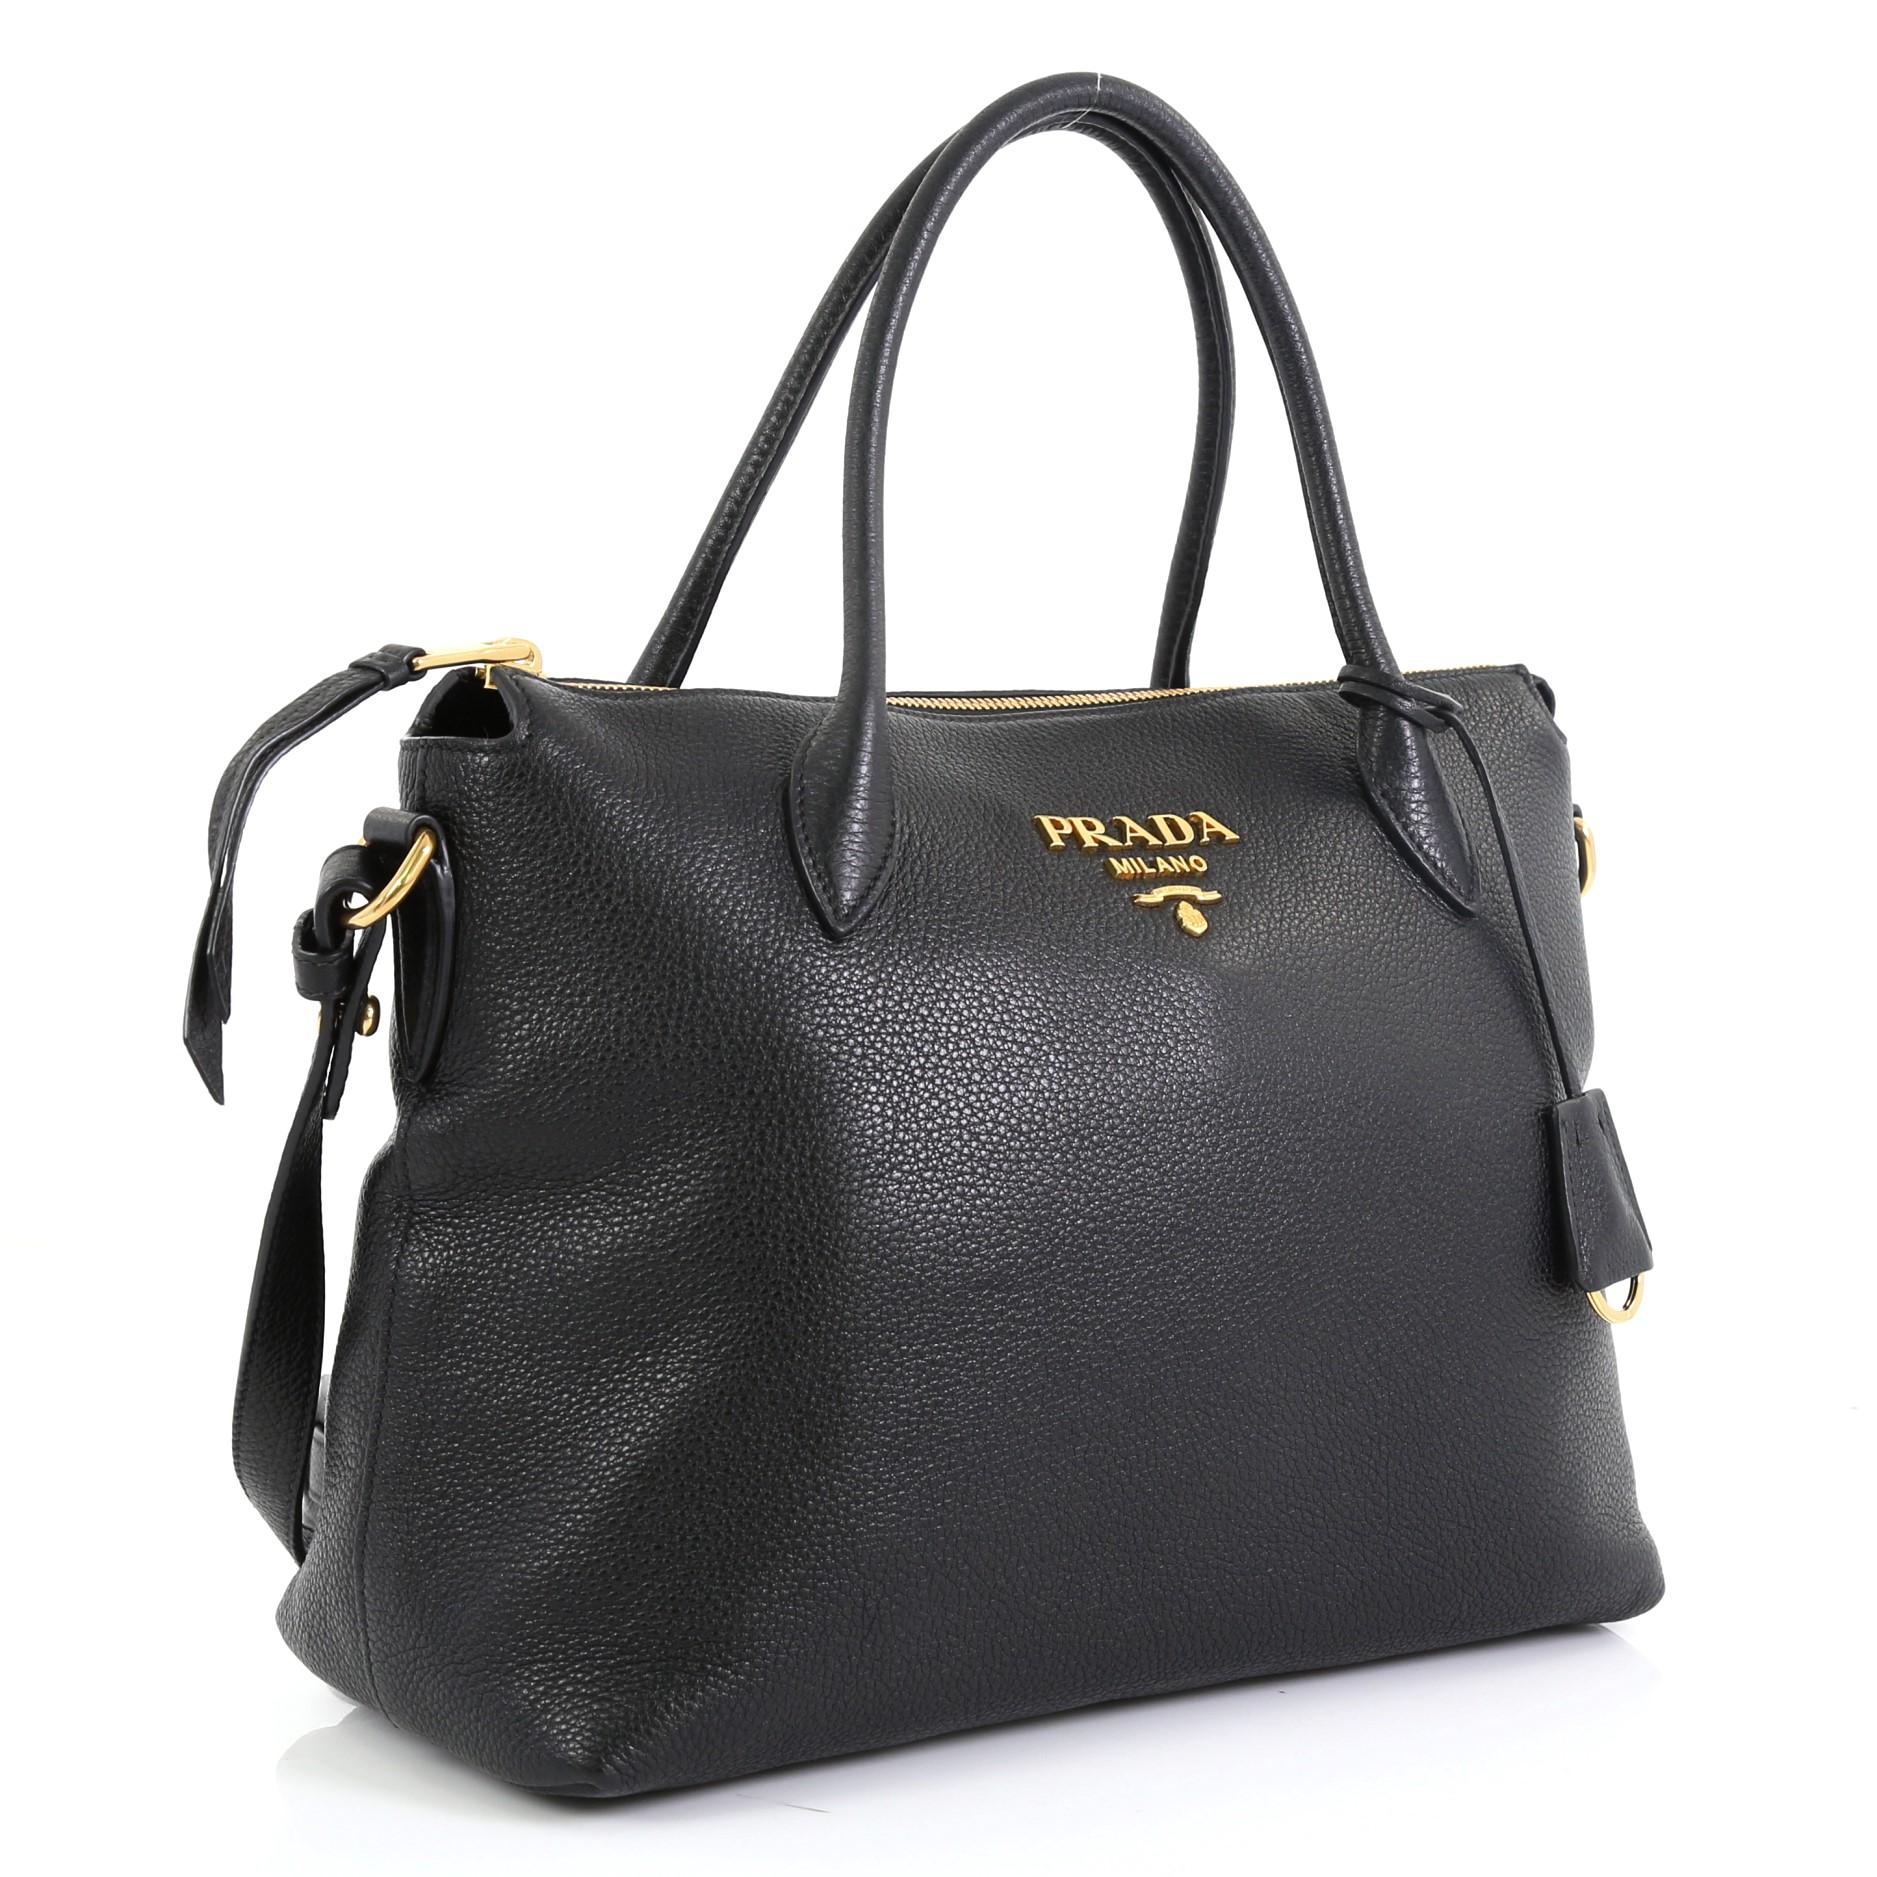 This Prada Convertible Zip Satchel Vitello Daino Medium, crafted in black leather, features dual-rolled leather handles, detachable strap, Prada logo at the center, and gold-tone hardware. Its zip closure opens to a black fabric interior with zip